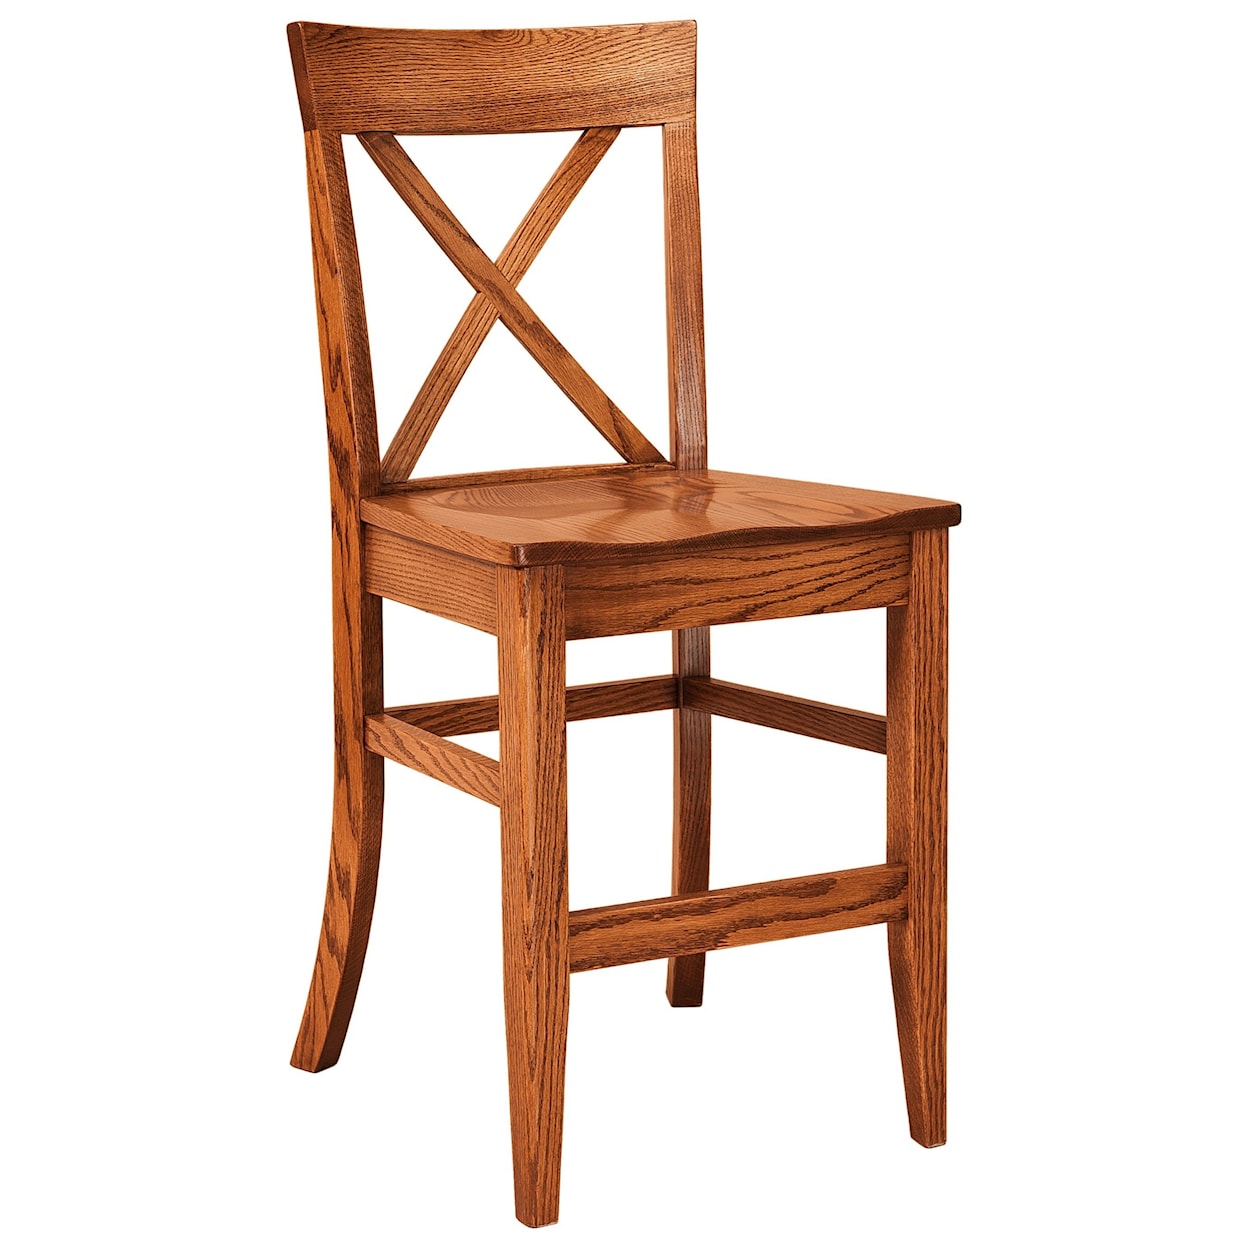 F&N Woodworking Frontier Stationary Bar Stool - Wood Seat